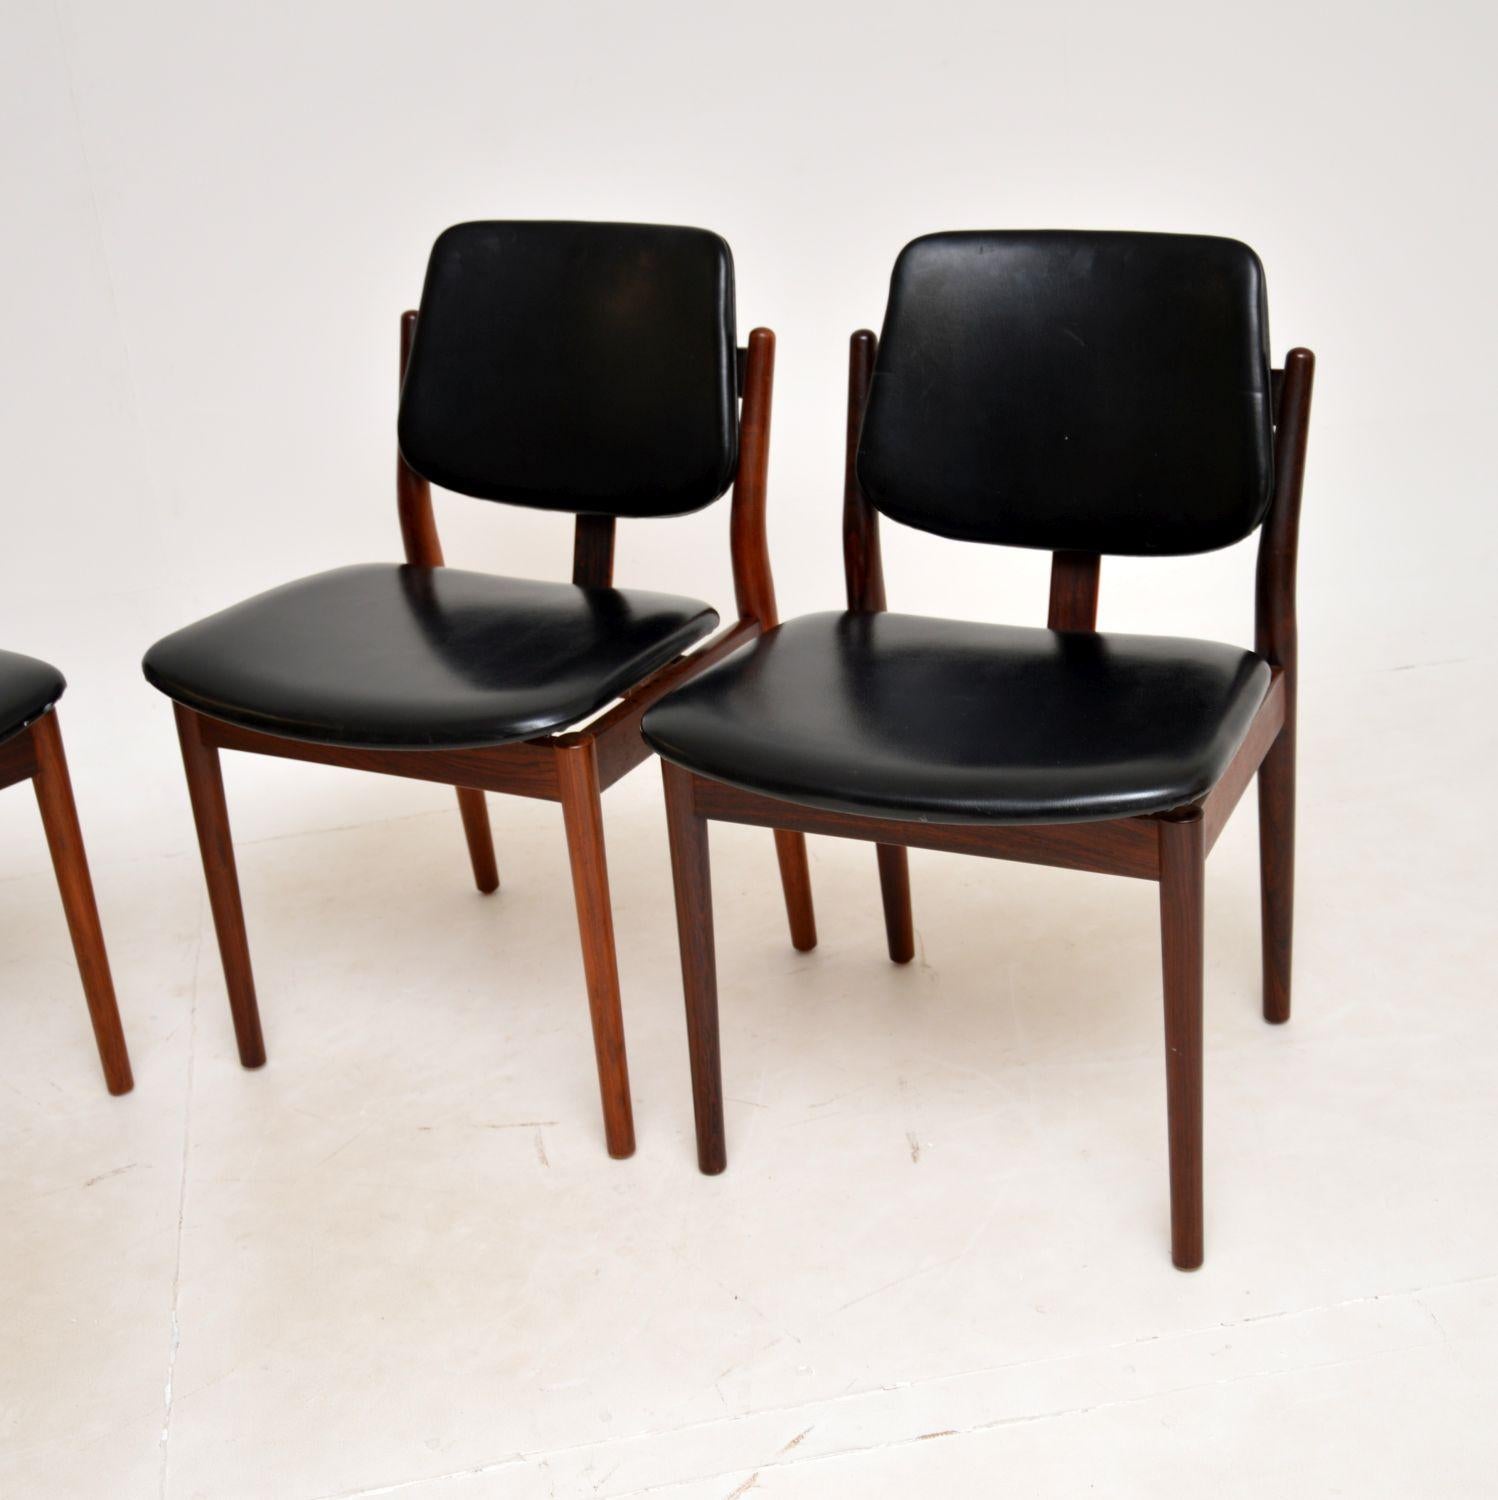 Mid-20th Century 1960s Set of 4 Danish Dining Chairs by Borge Rammeskov for Sibast